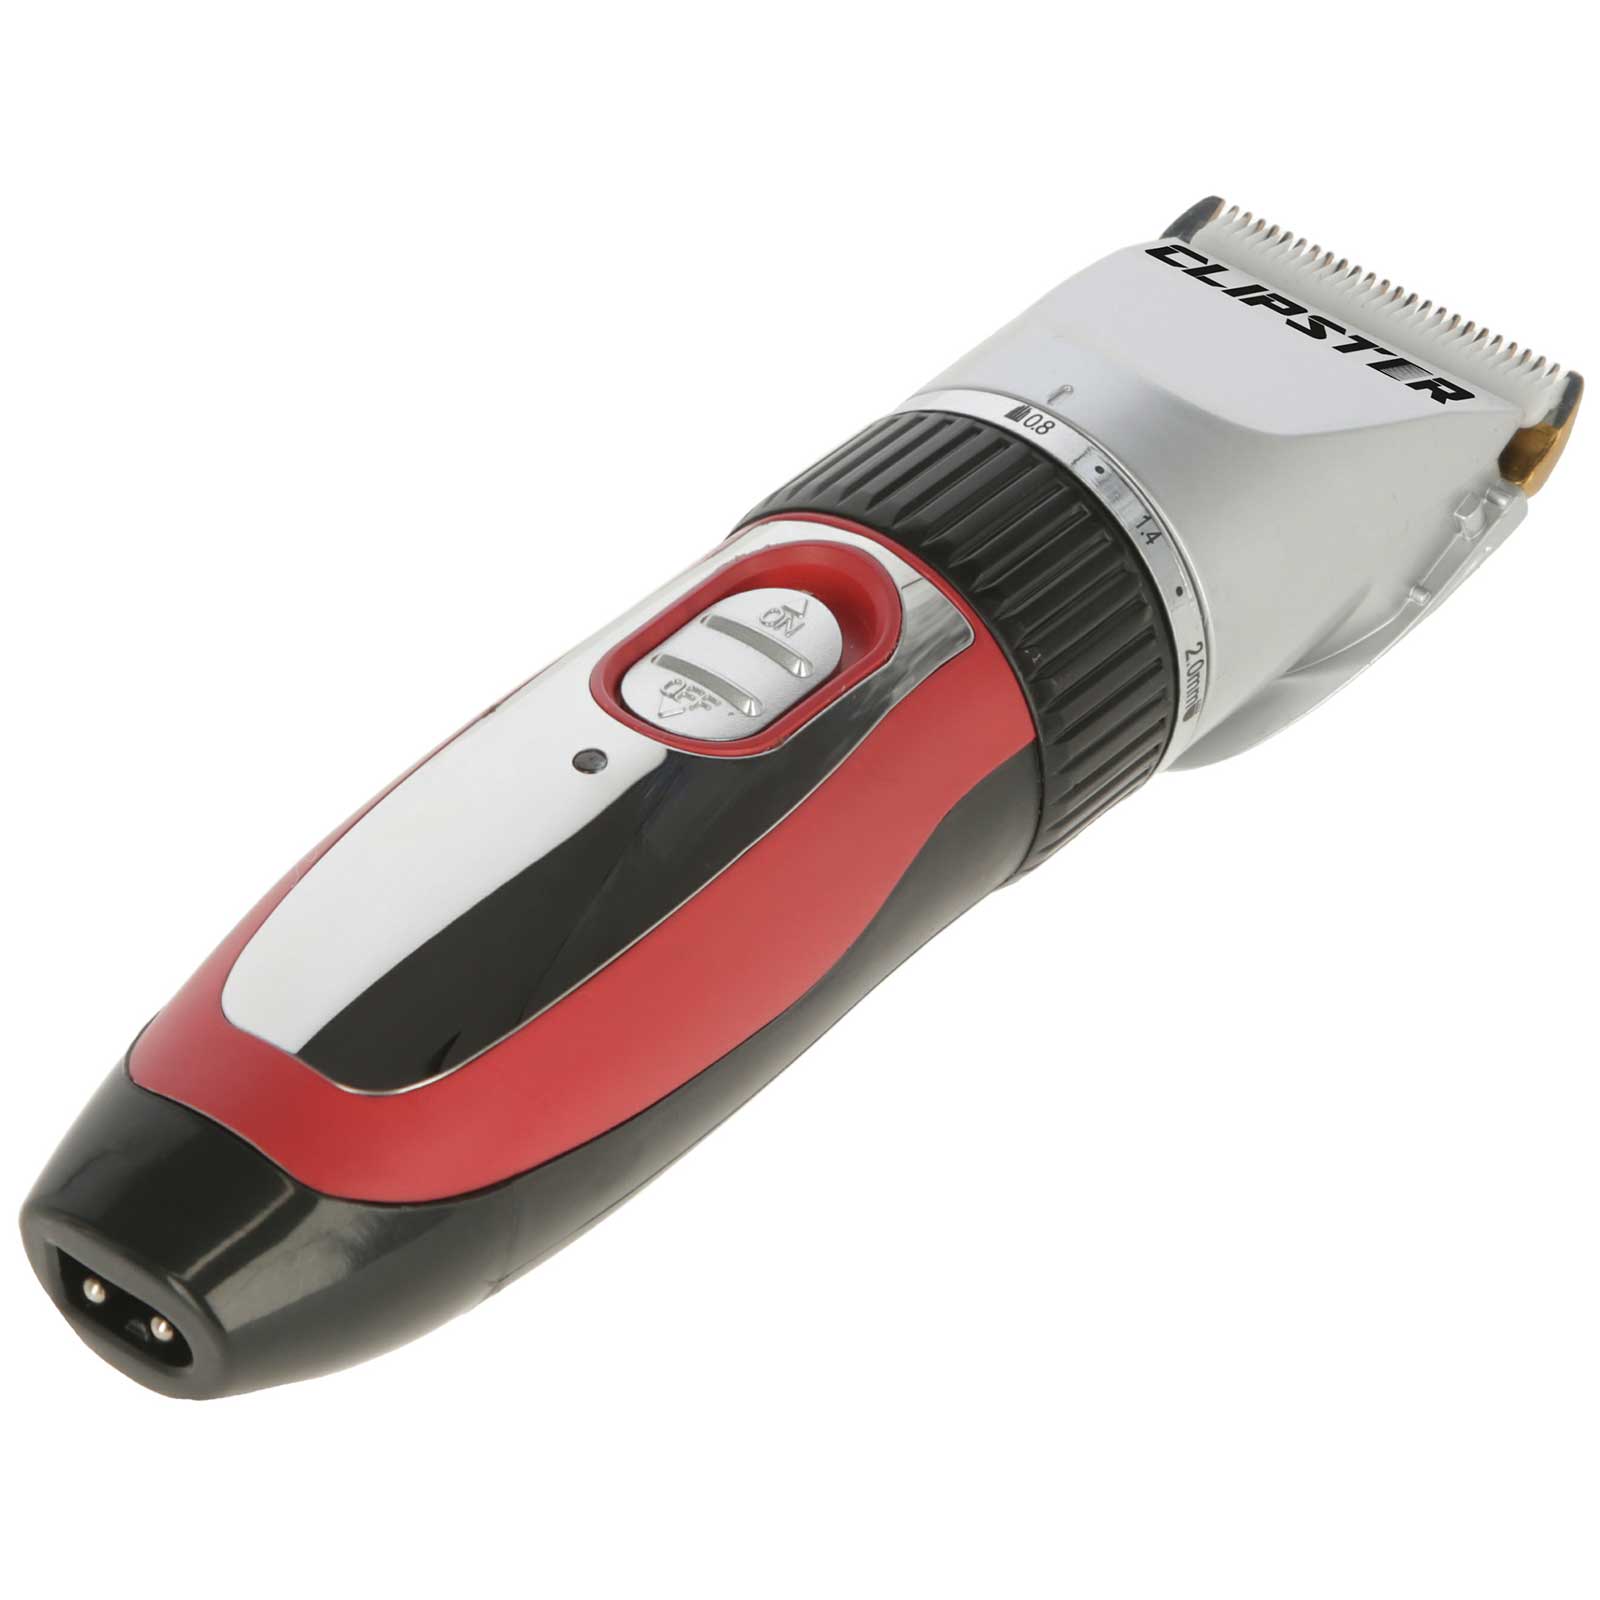 Clipster Sonic Clipper 1x battery